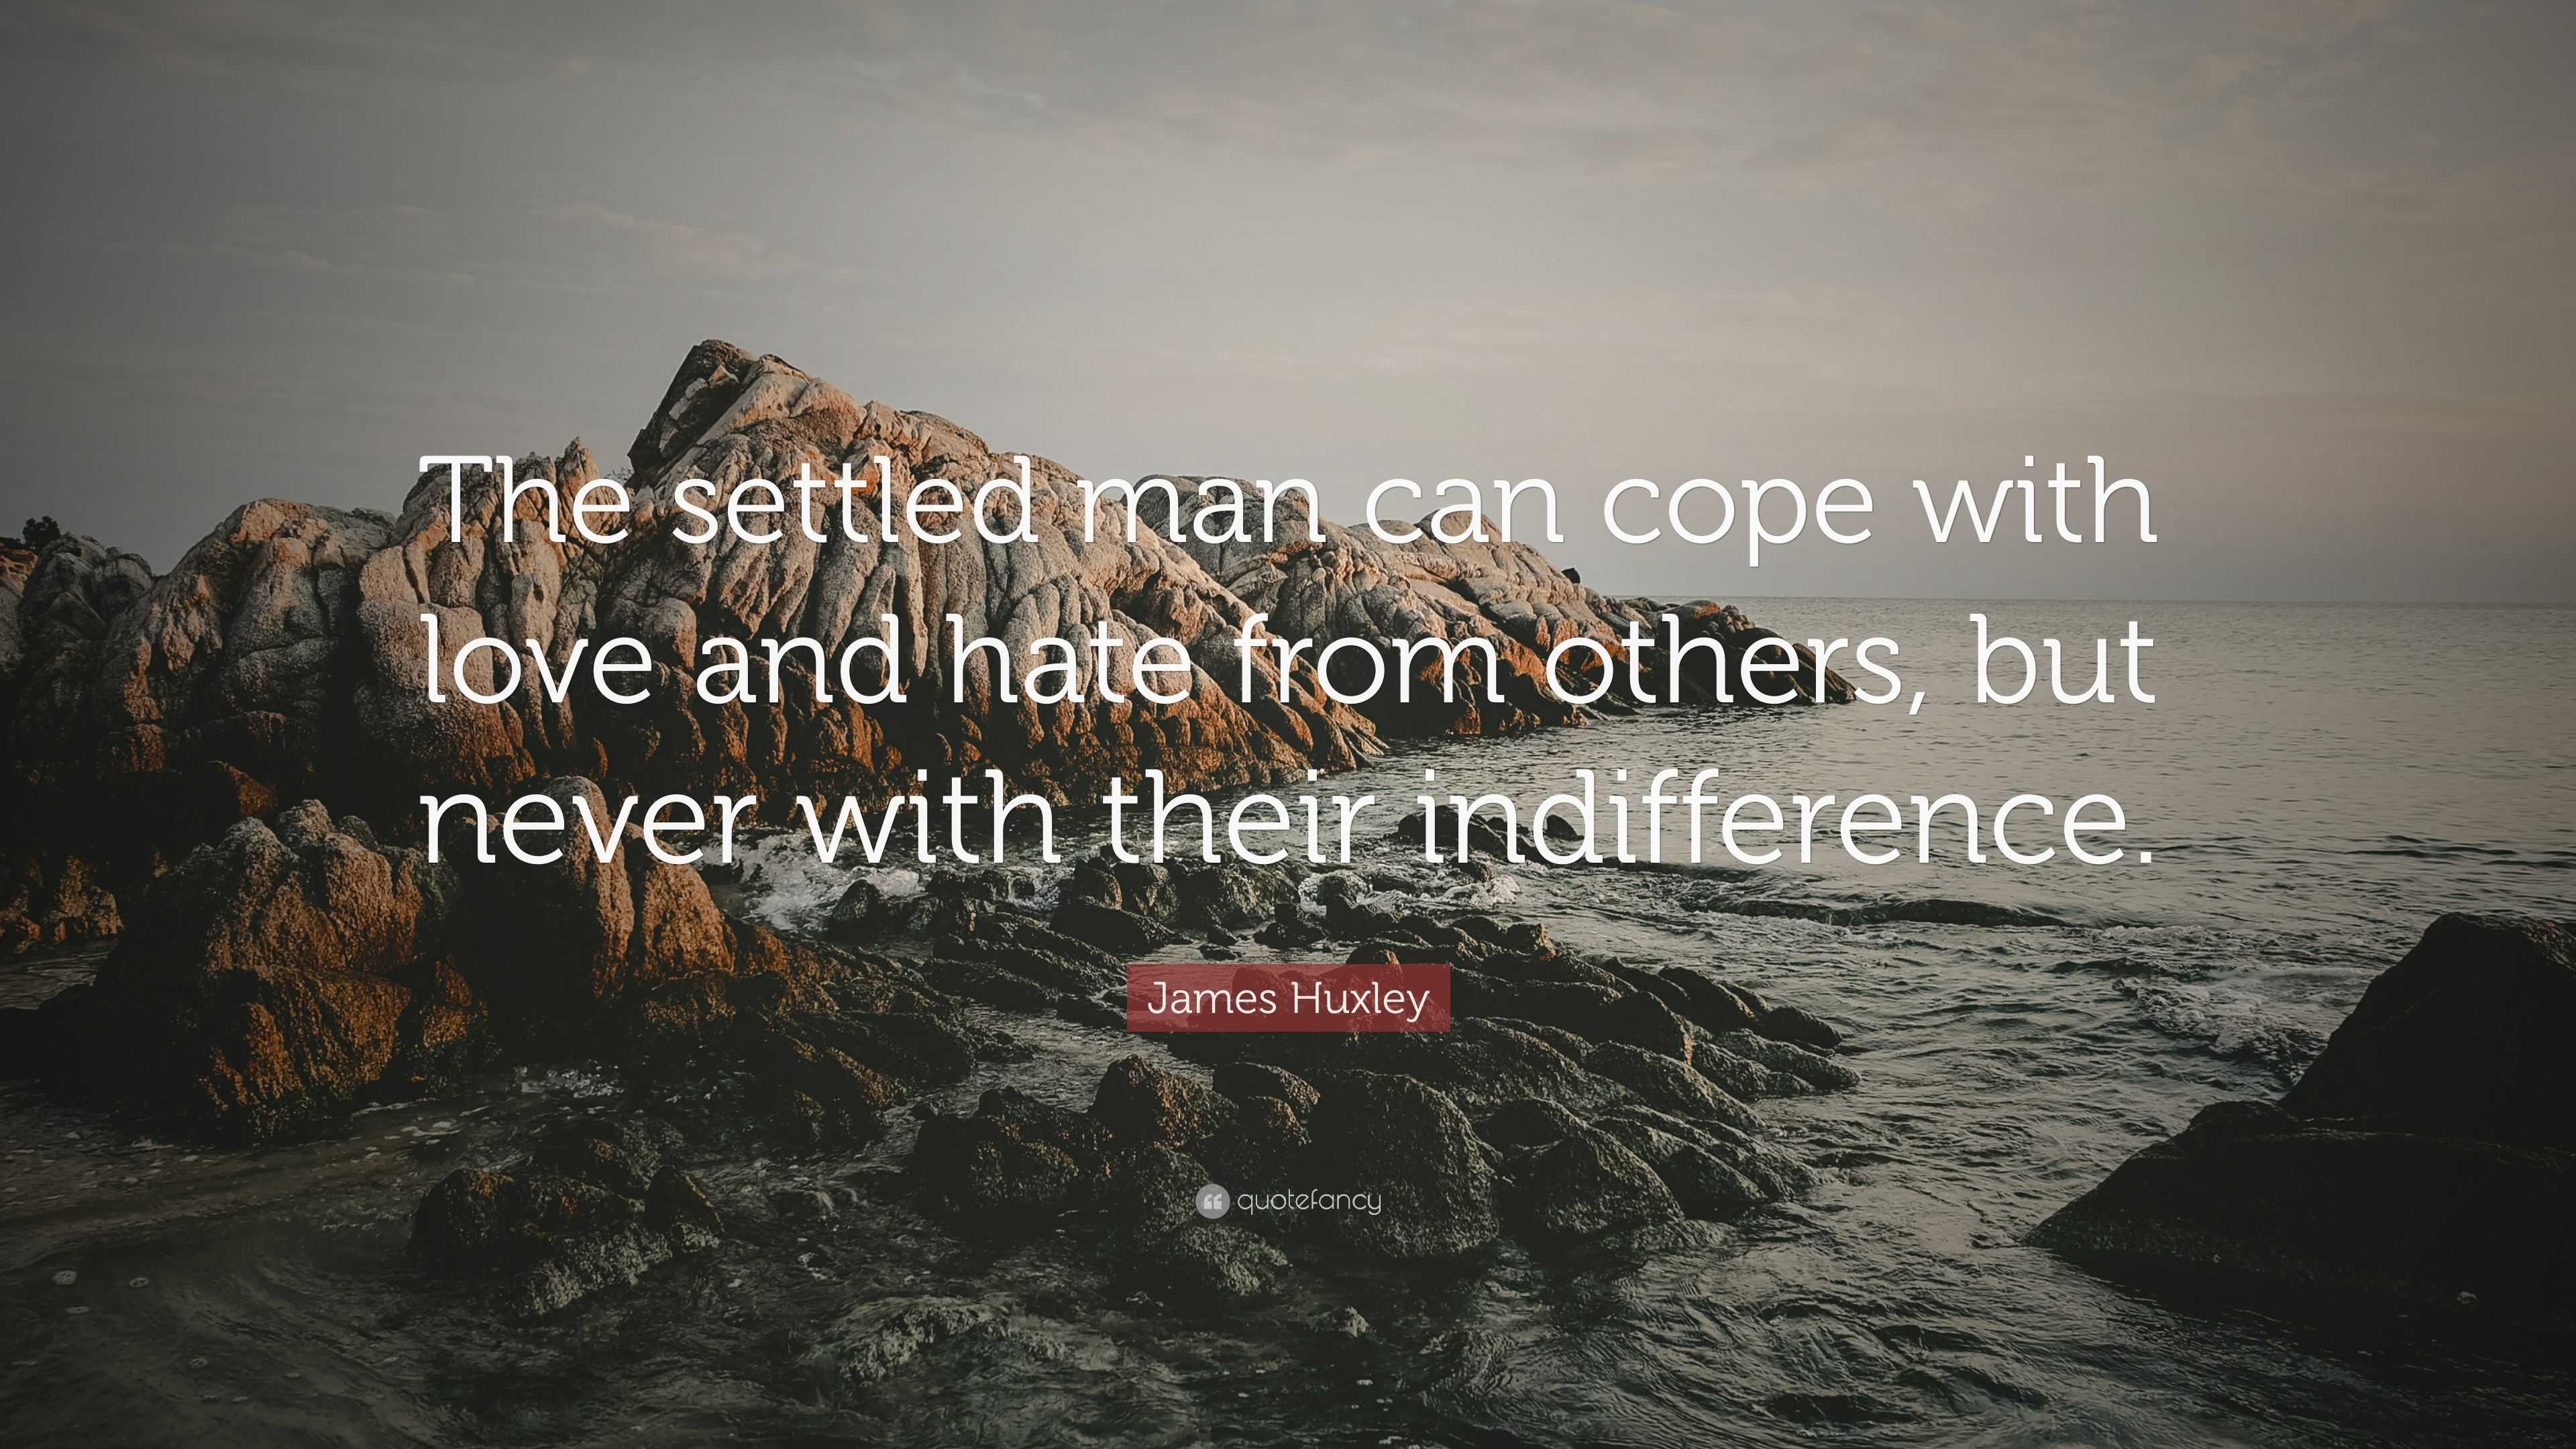 James Huxley Quote: “The settled man can cope with love and hate from ...